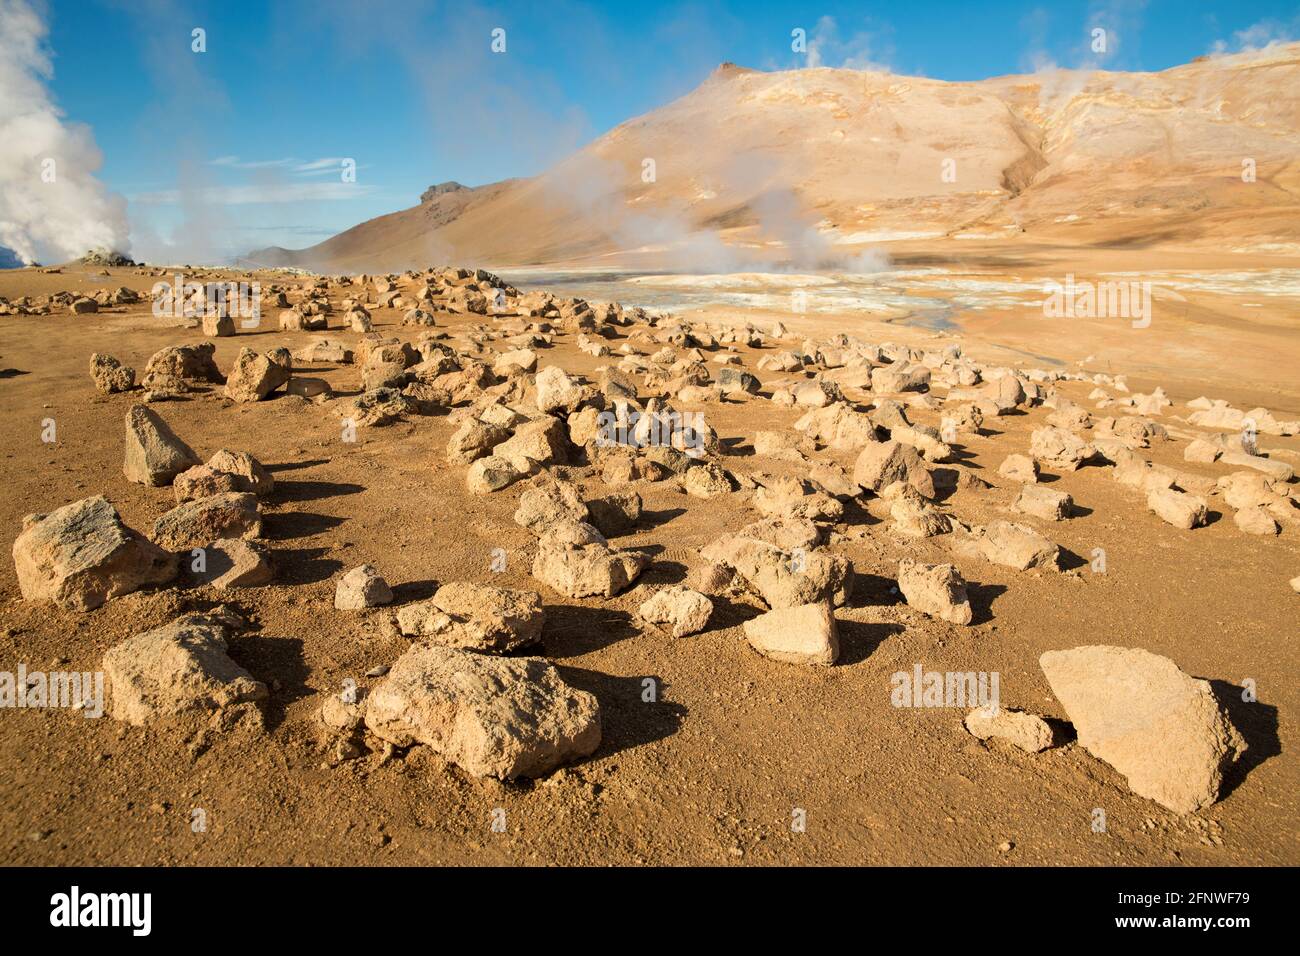 Astronaut in Martian landscape, Iceland Stock Photo